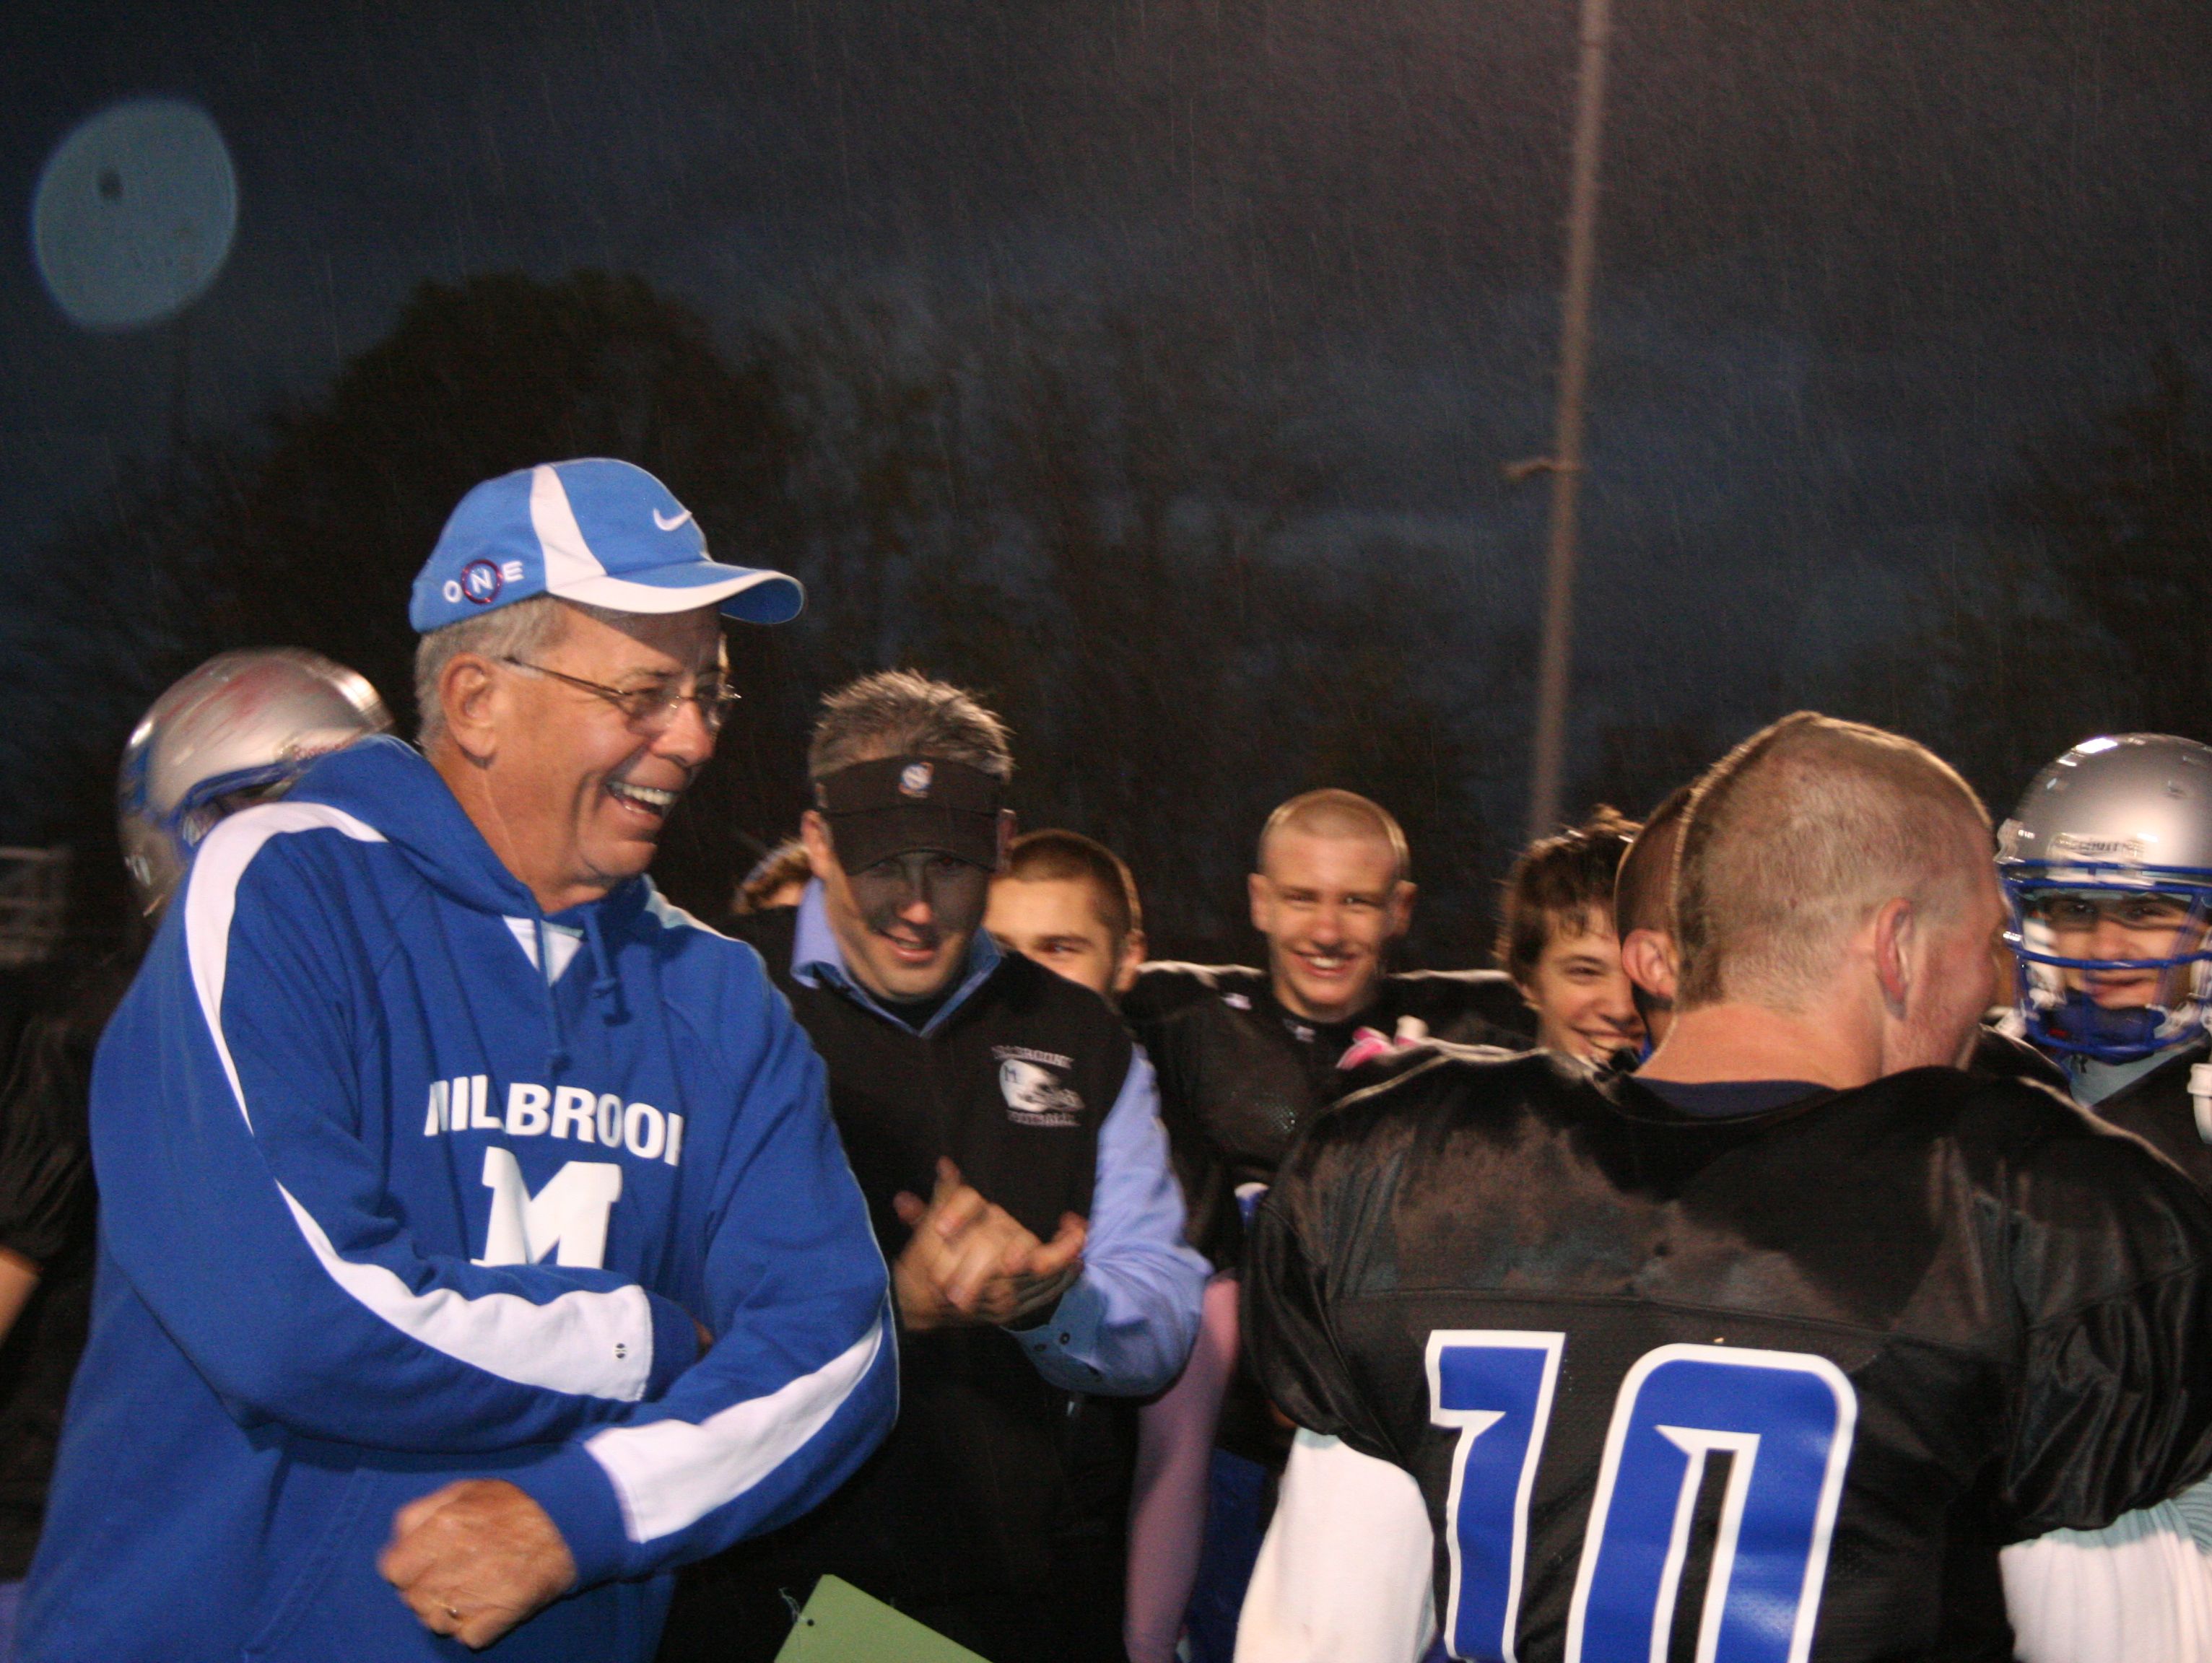 Peter Keenan, left, stands with members of the Millbrook High School football team.